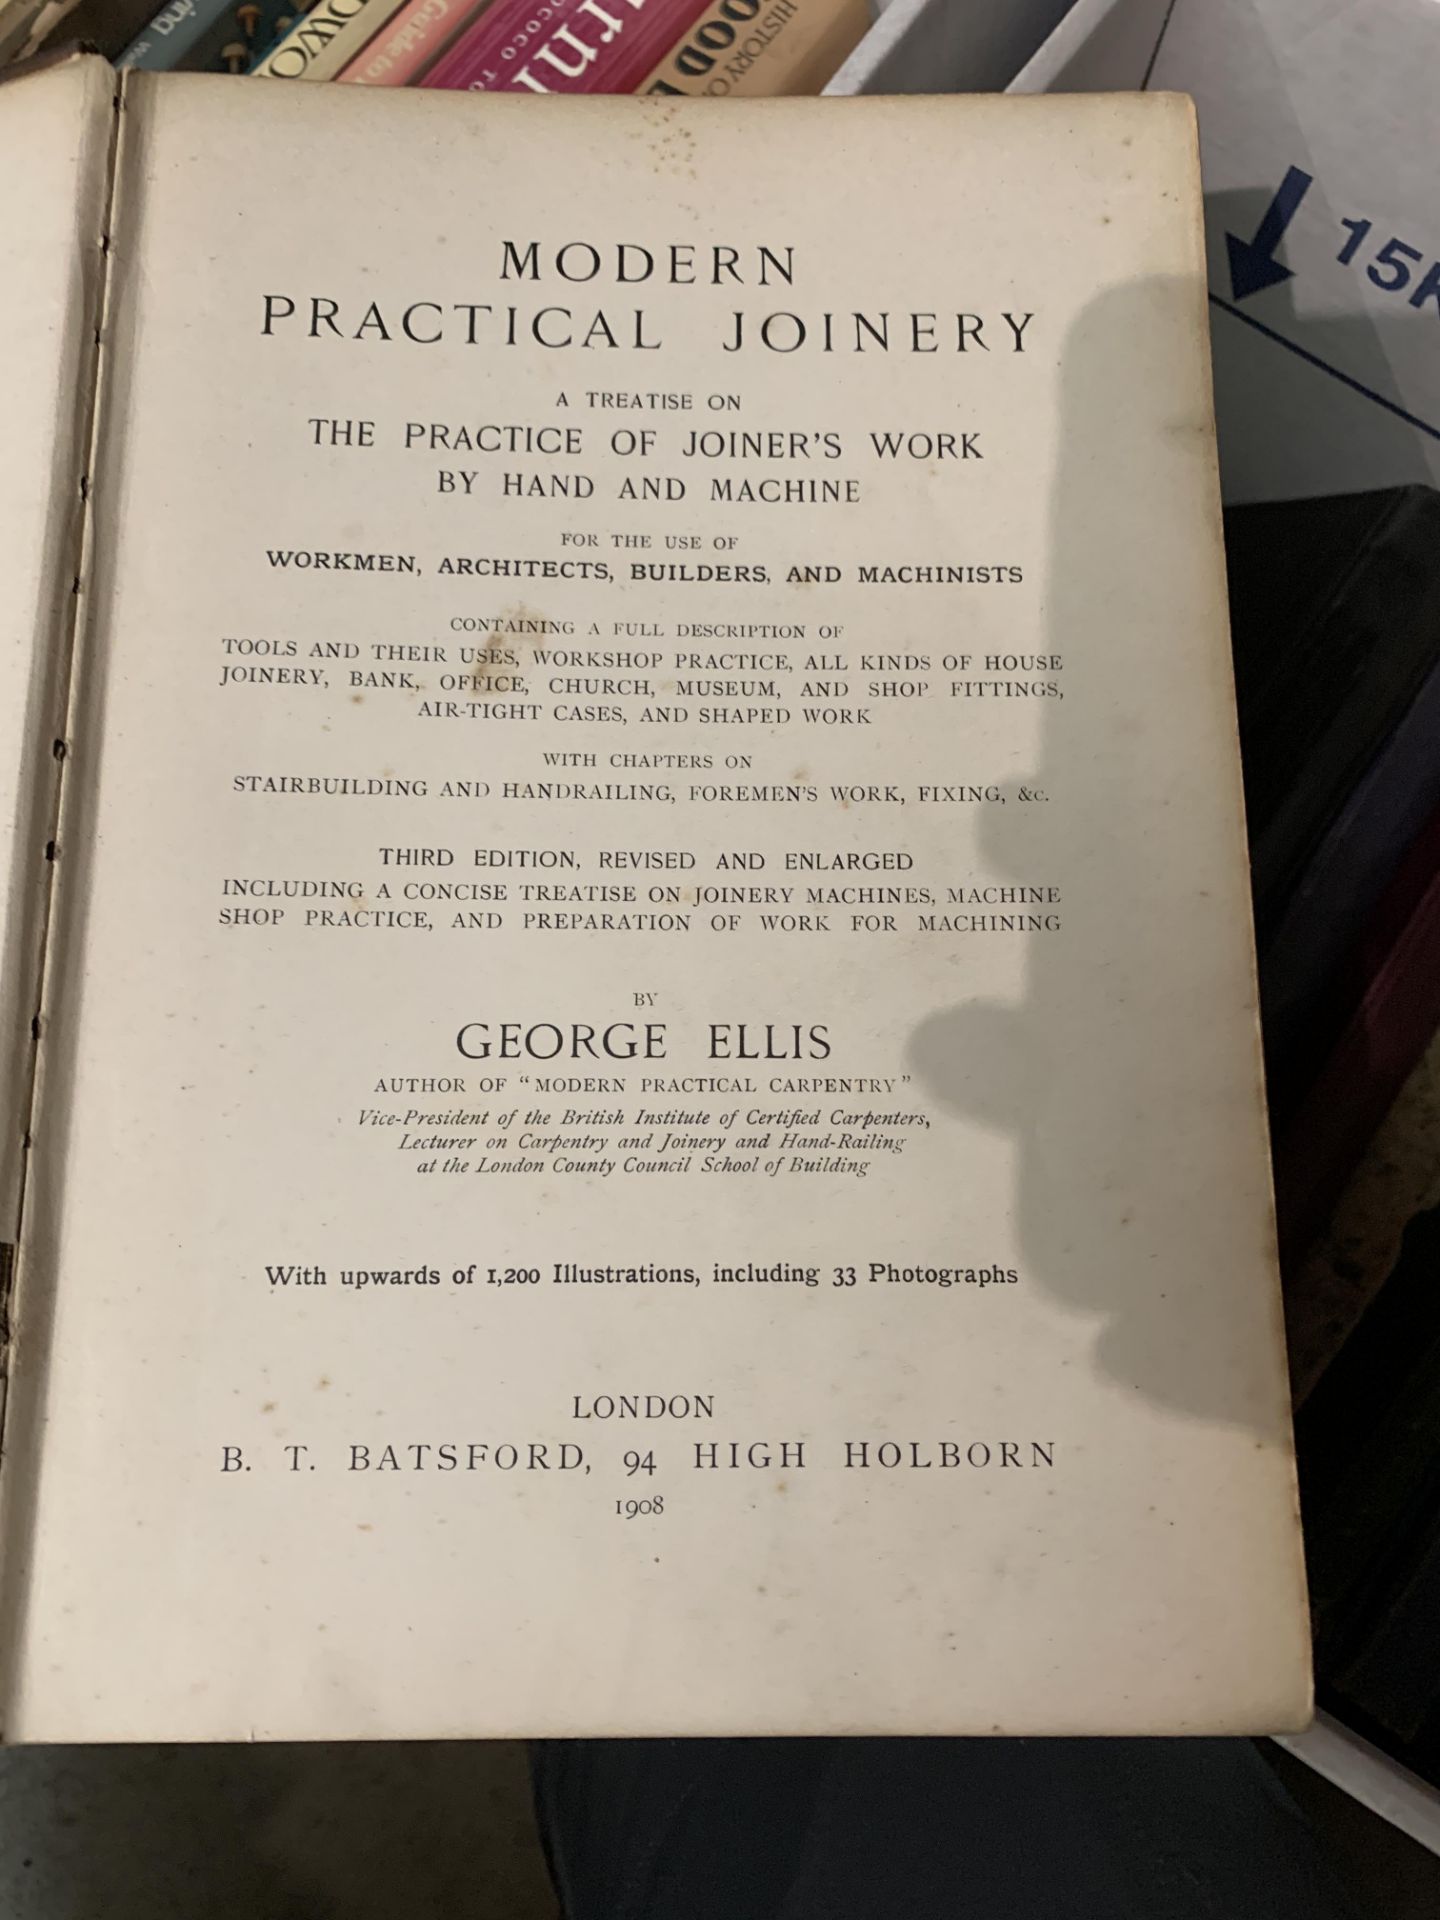 Contents to three boxes, various books on furniture, woodworking and metalwork, - Image 13 of 13